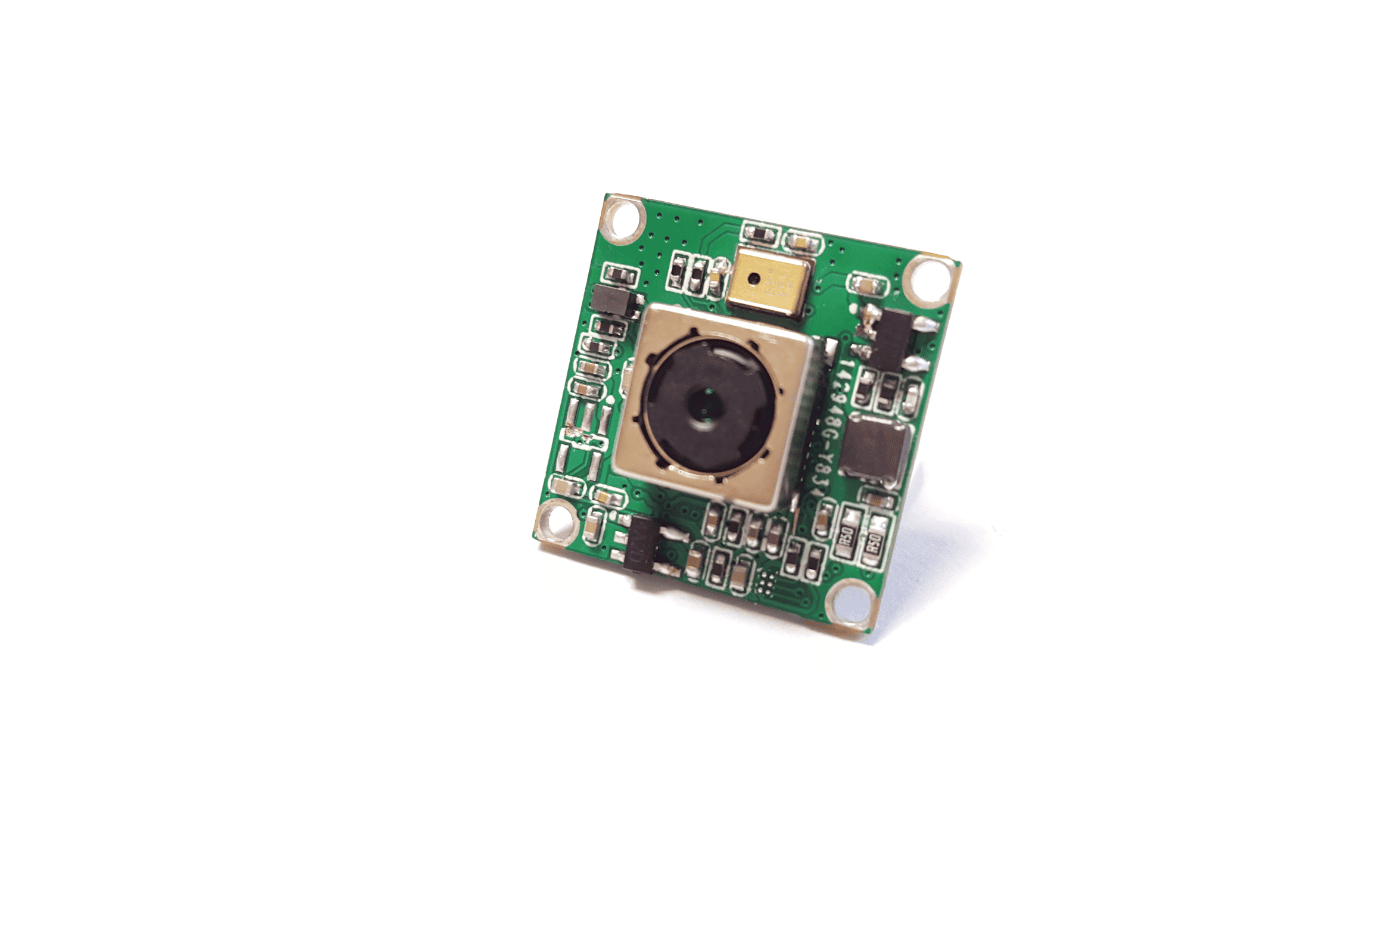 8MP, 19mmx19mm Small Size, Auto Focus, USB2.0 Camera Module with SONY IMX179 Sensor